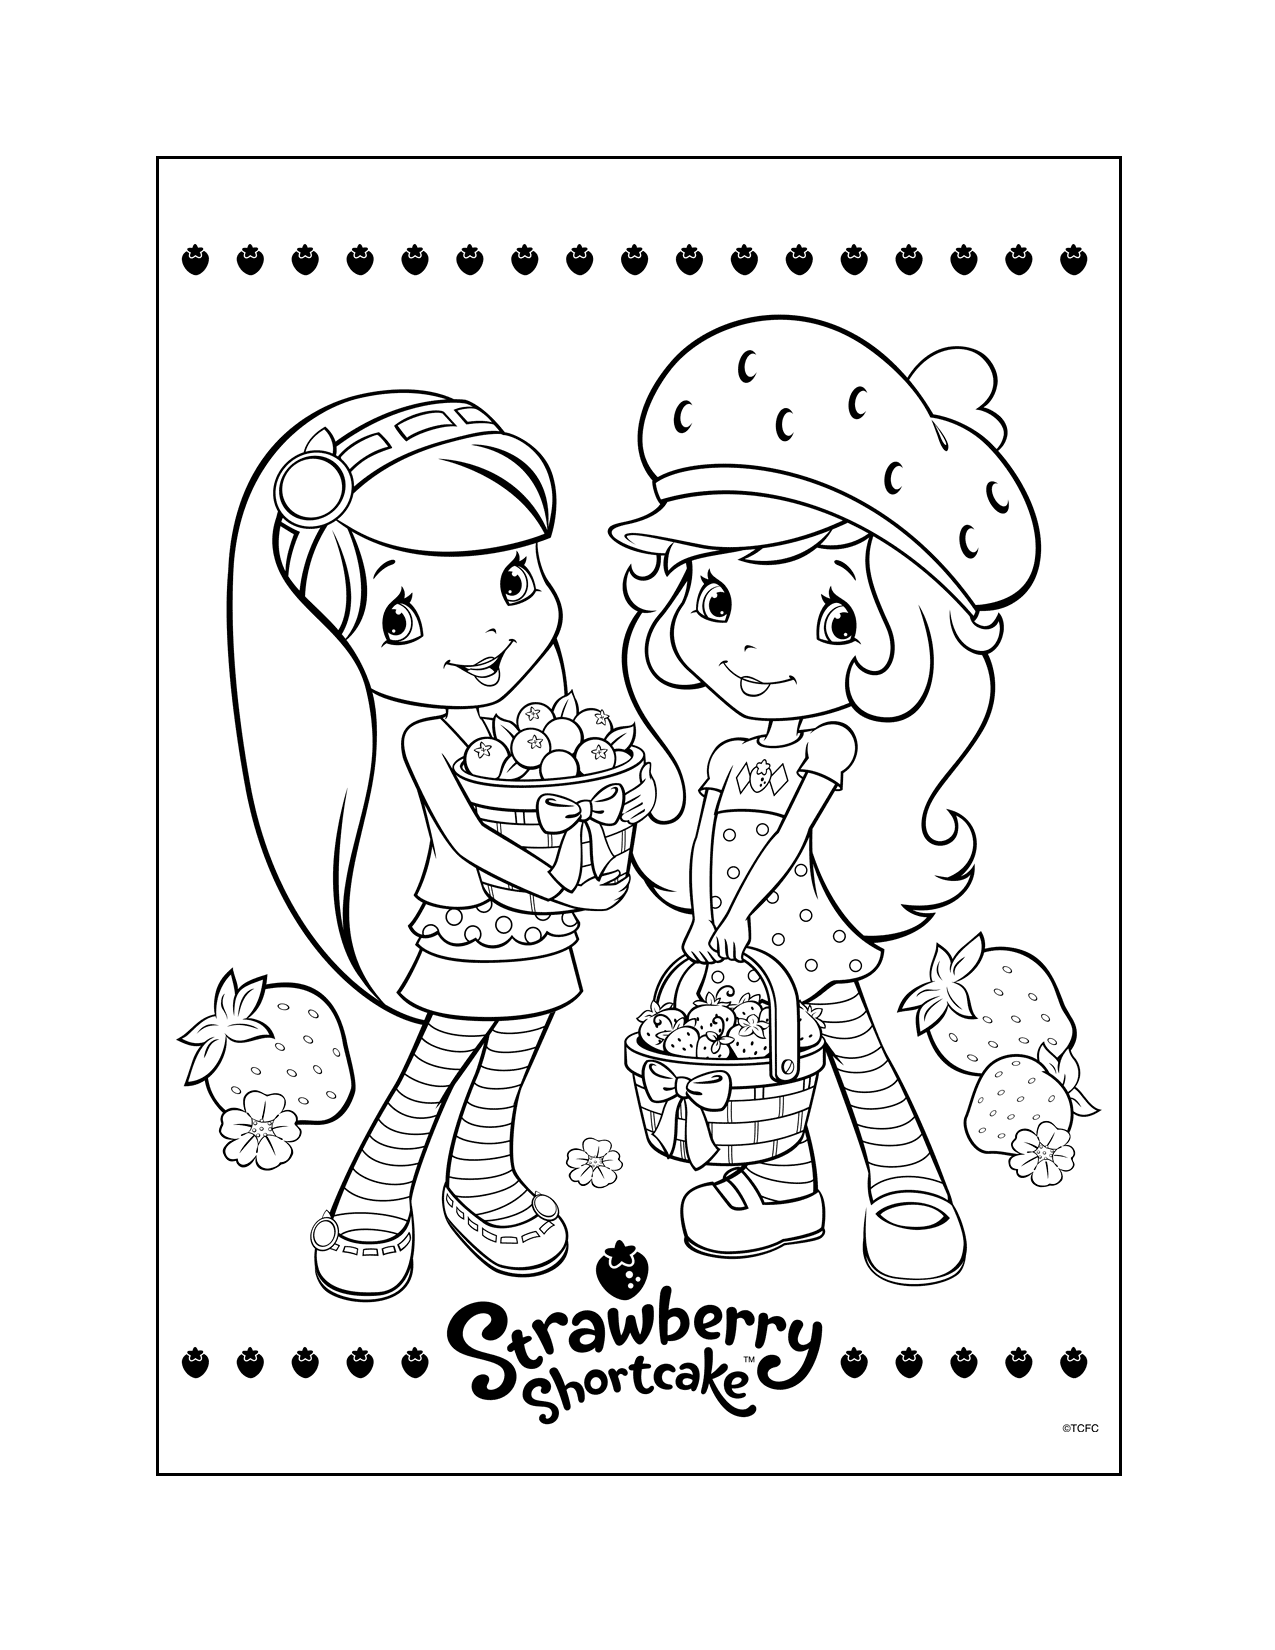 Strawberry Shortcake And Blueberry Muffin Coloring Page